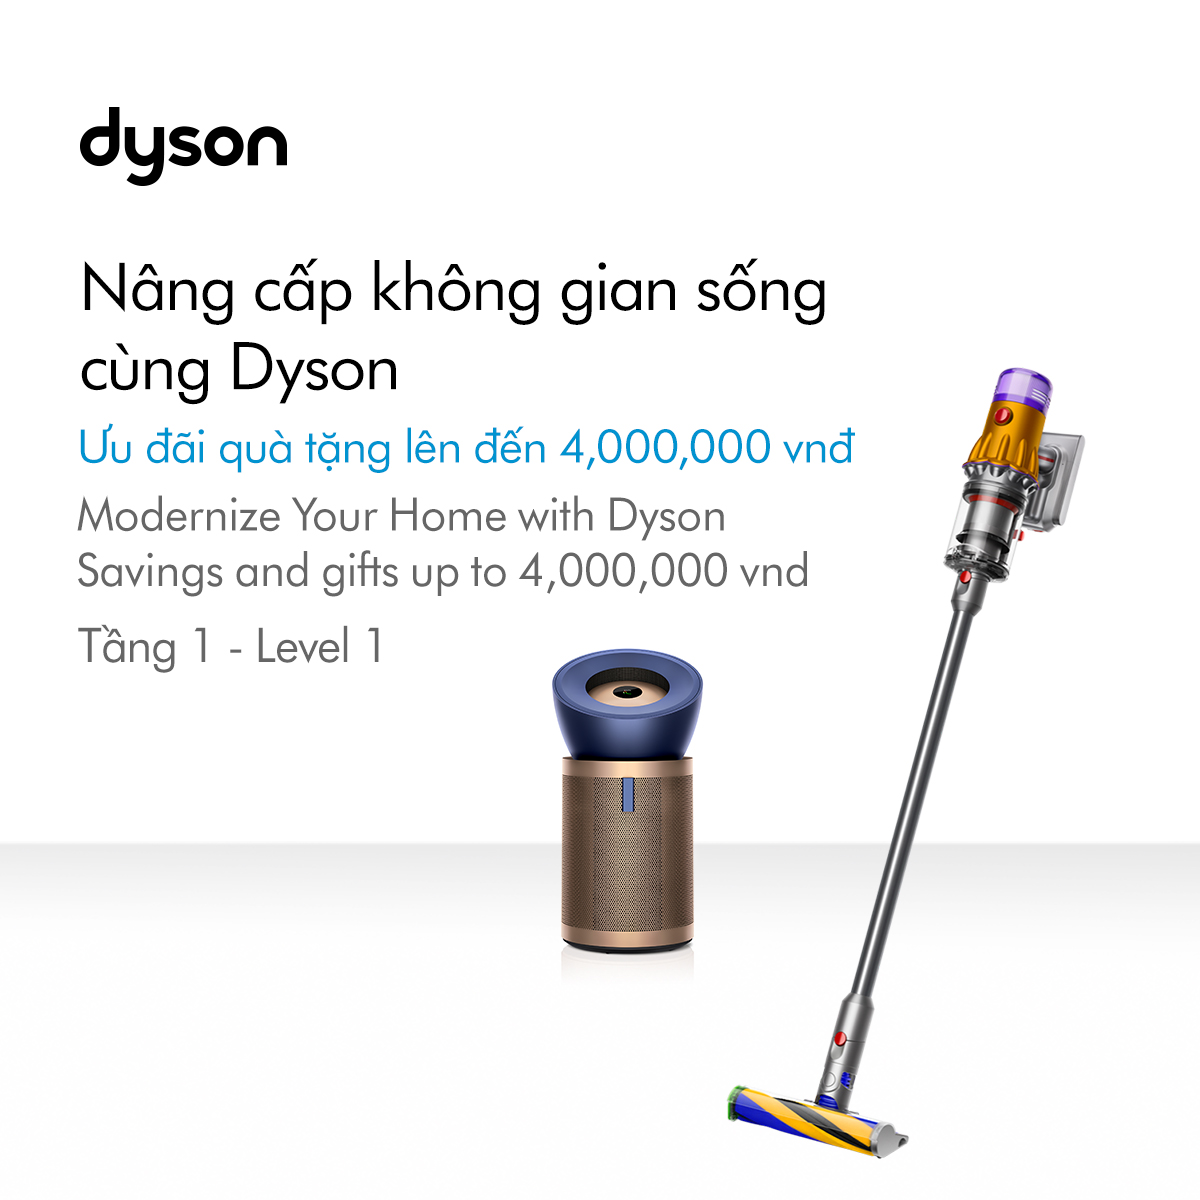 MODERNIZE YOUR HOME WITH DYSON - SAVINGS AND GIFT UP TO 4,000,000 VND🏠